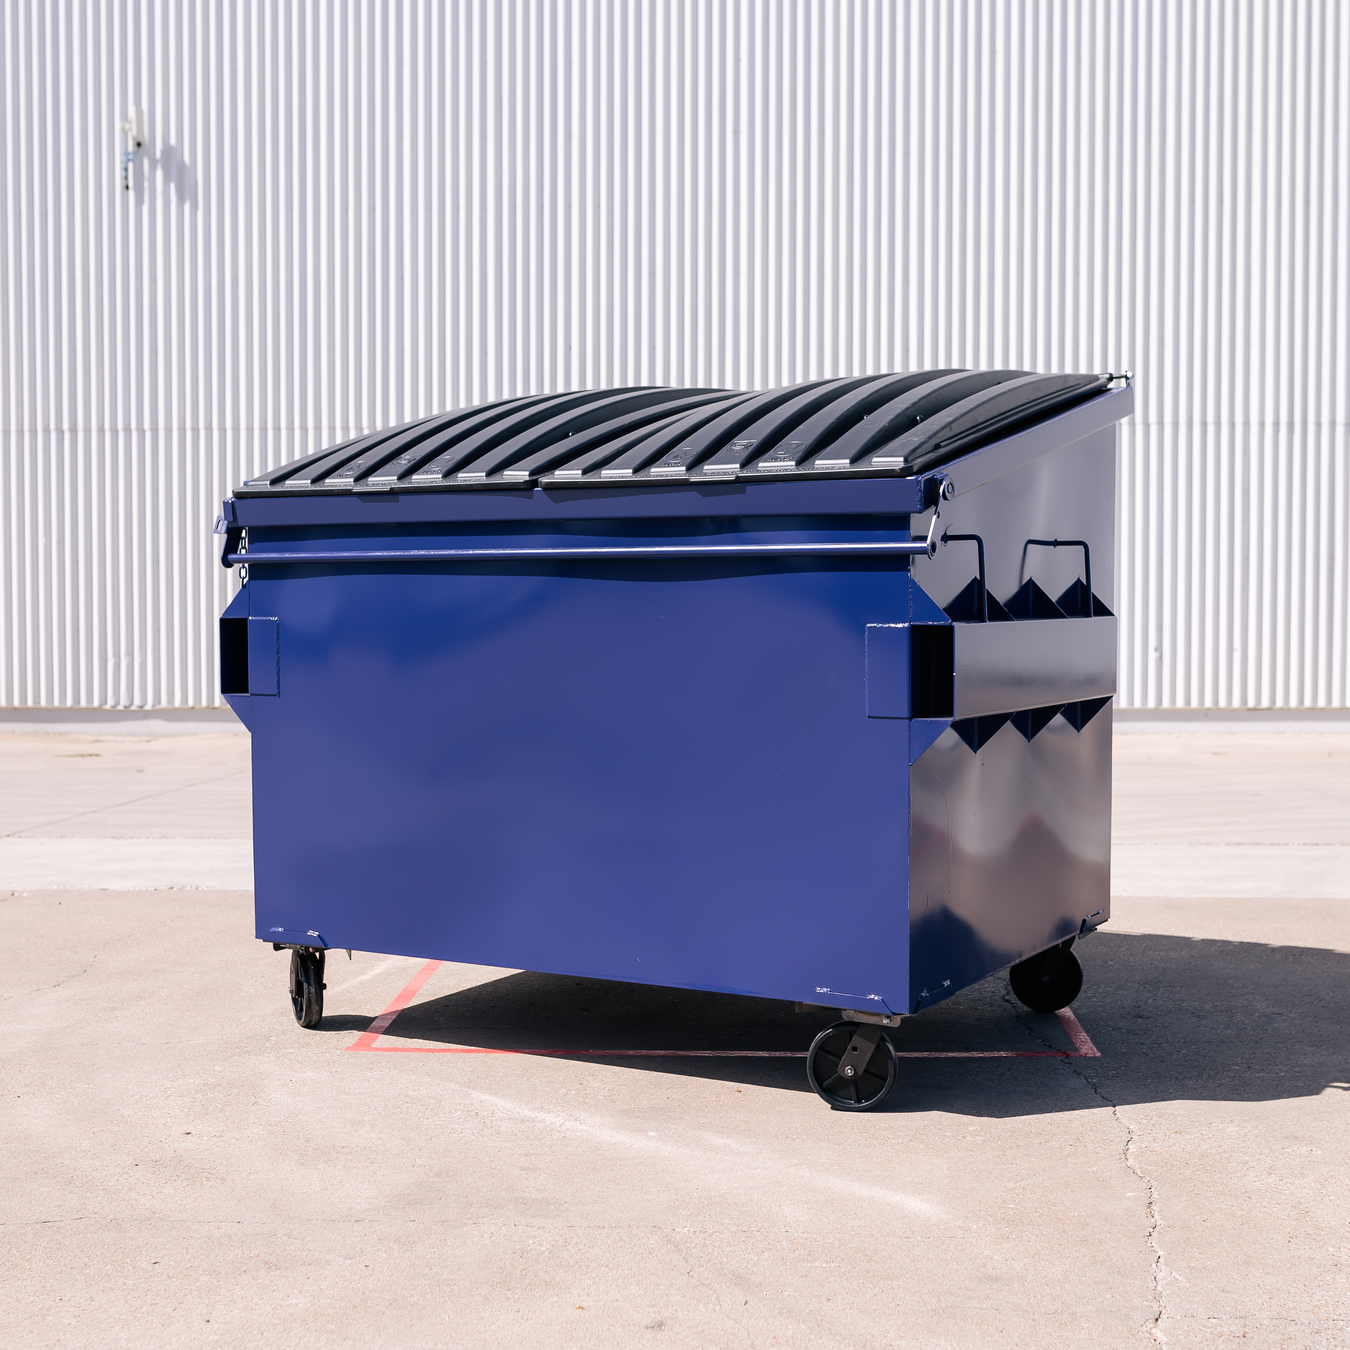 High Quality & Durable Dumpsters/Containers